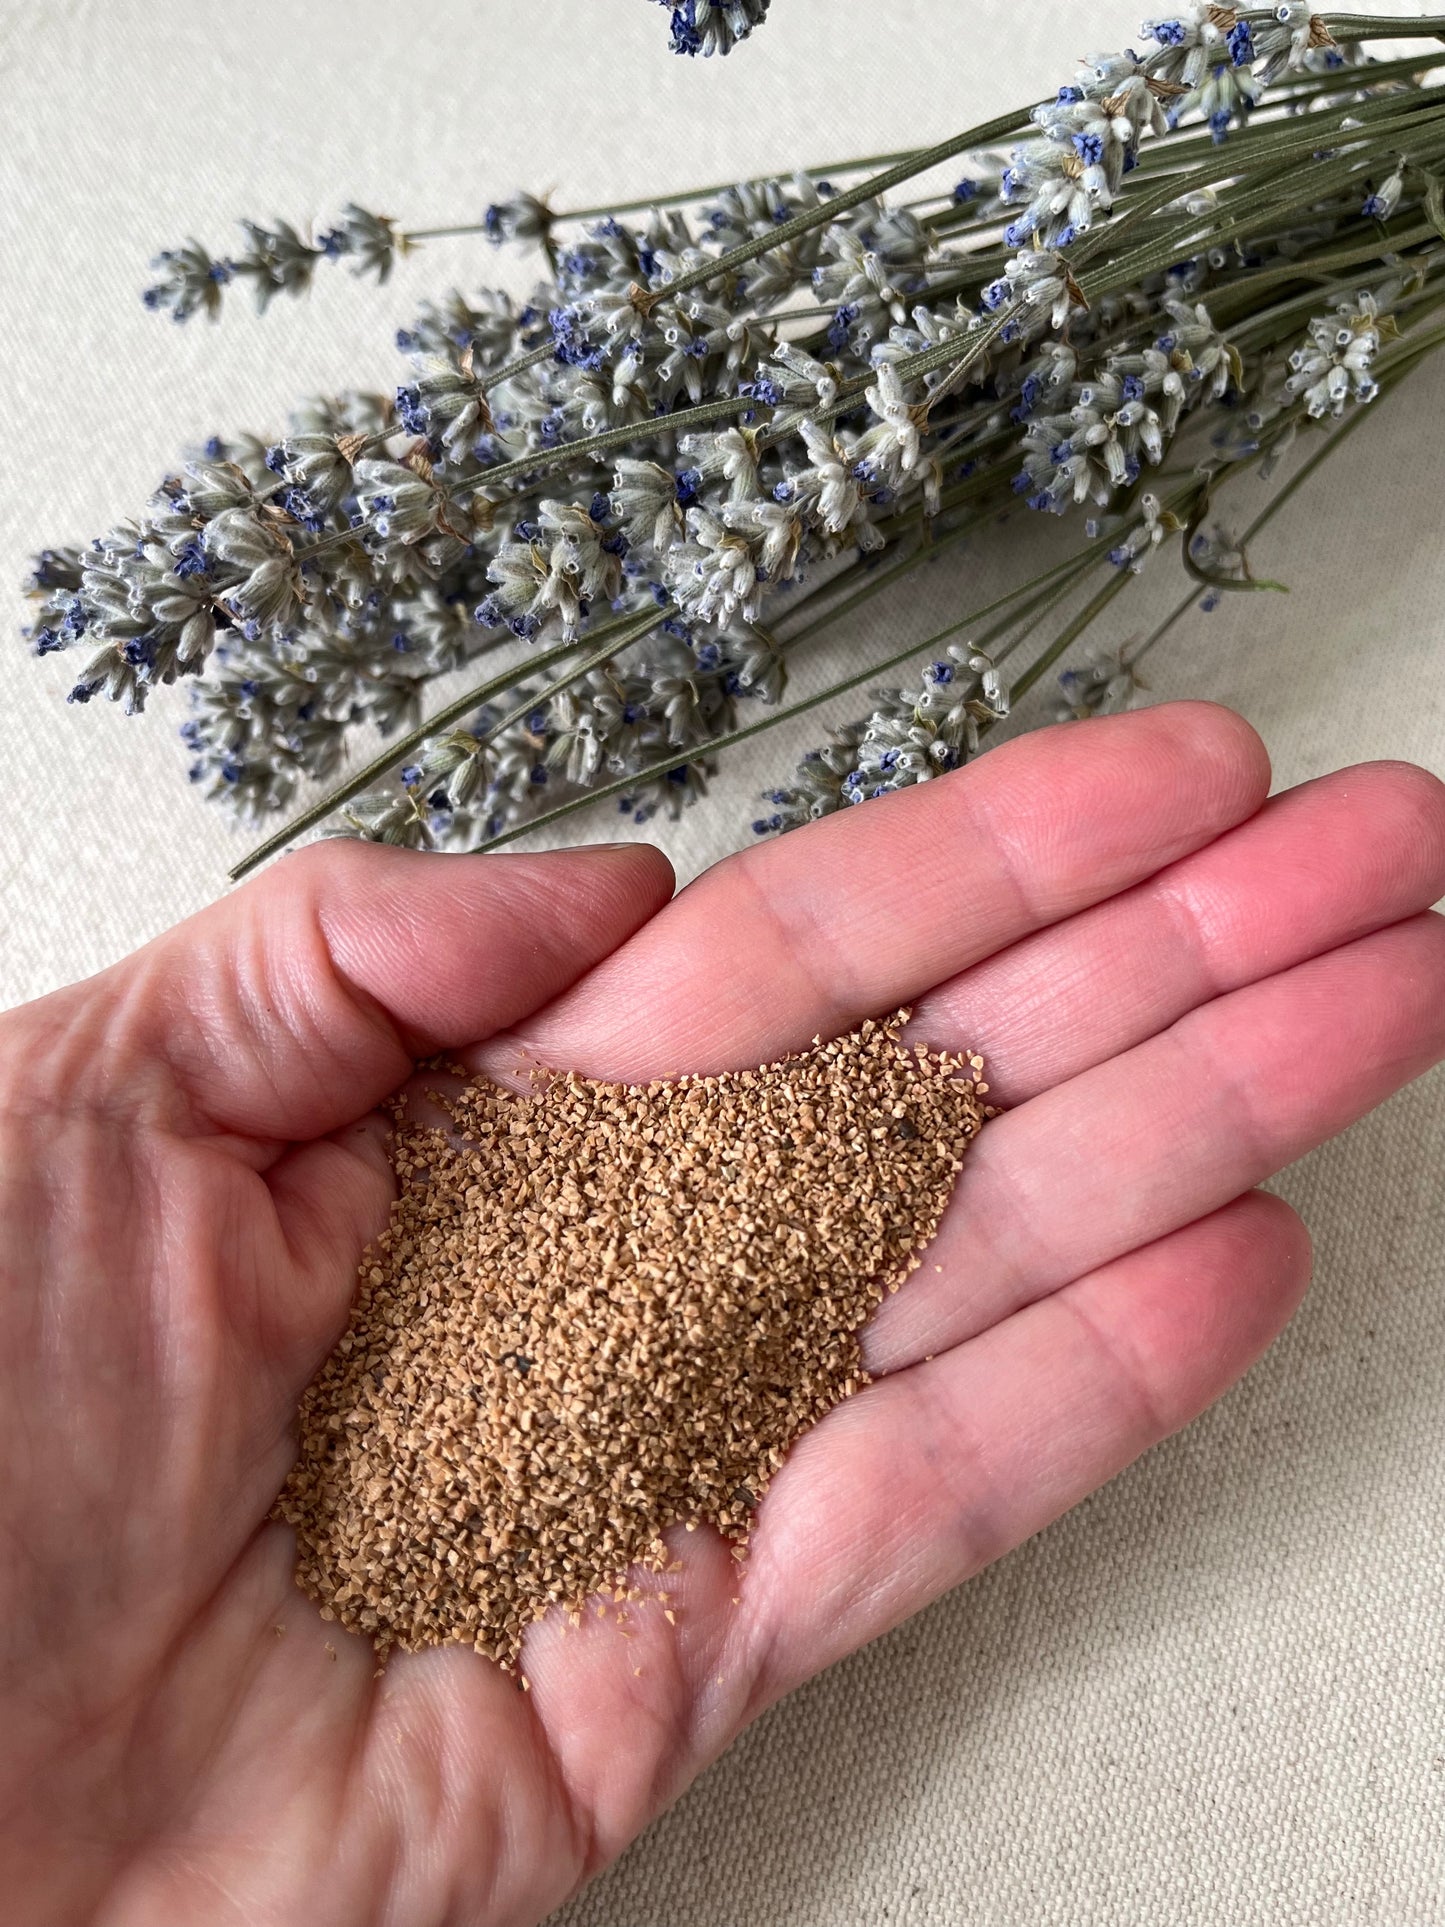 A hand holds crushed walnut shell. It is coarser than sand and a golden colour. Dried lavender stems lay in the background.